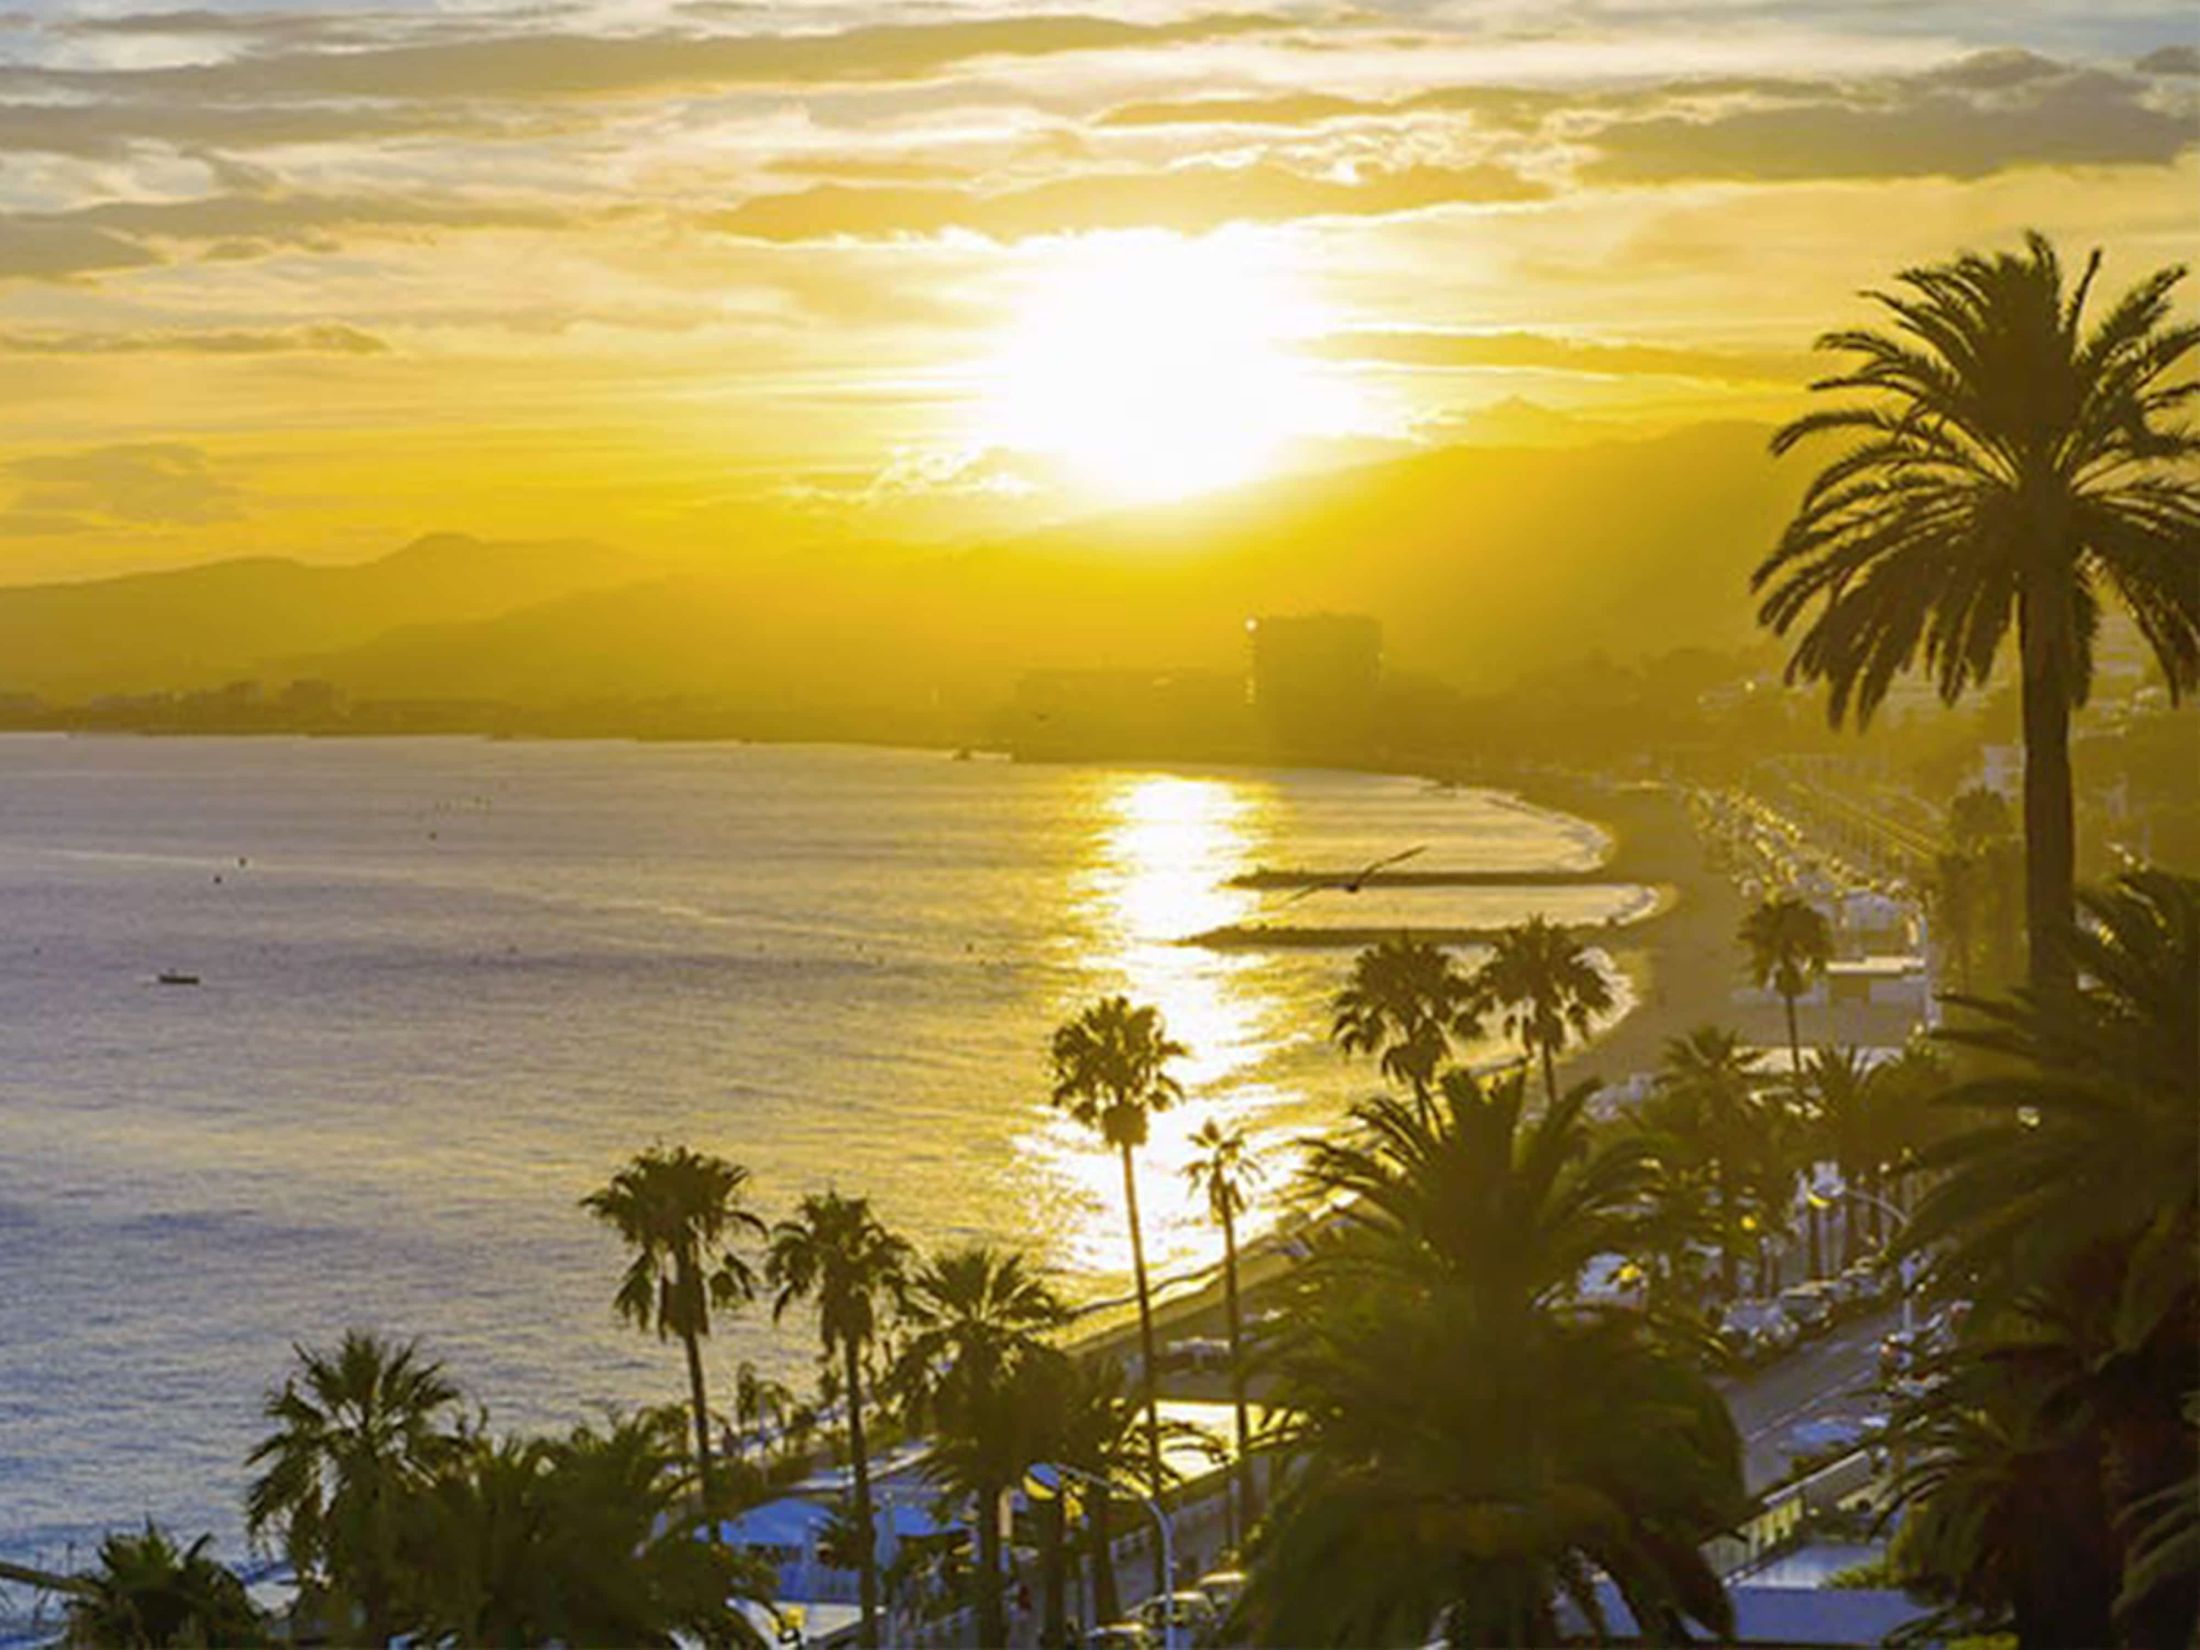 Discover Cannes in a new way